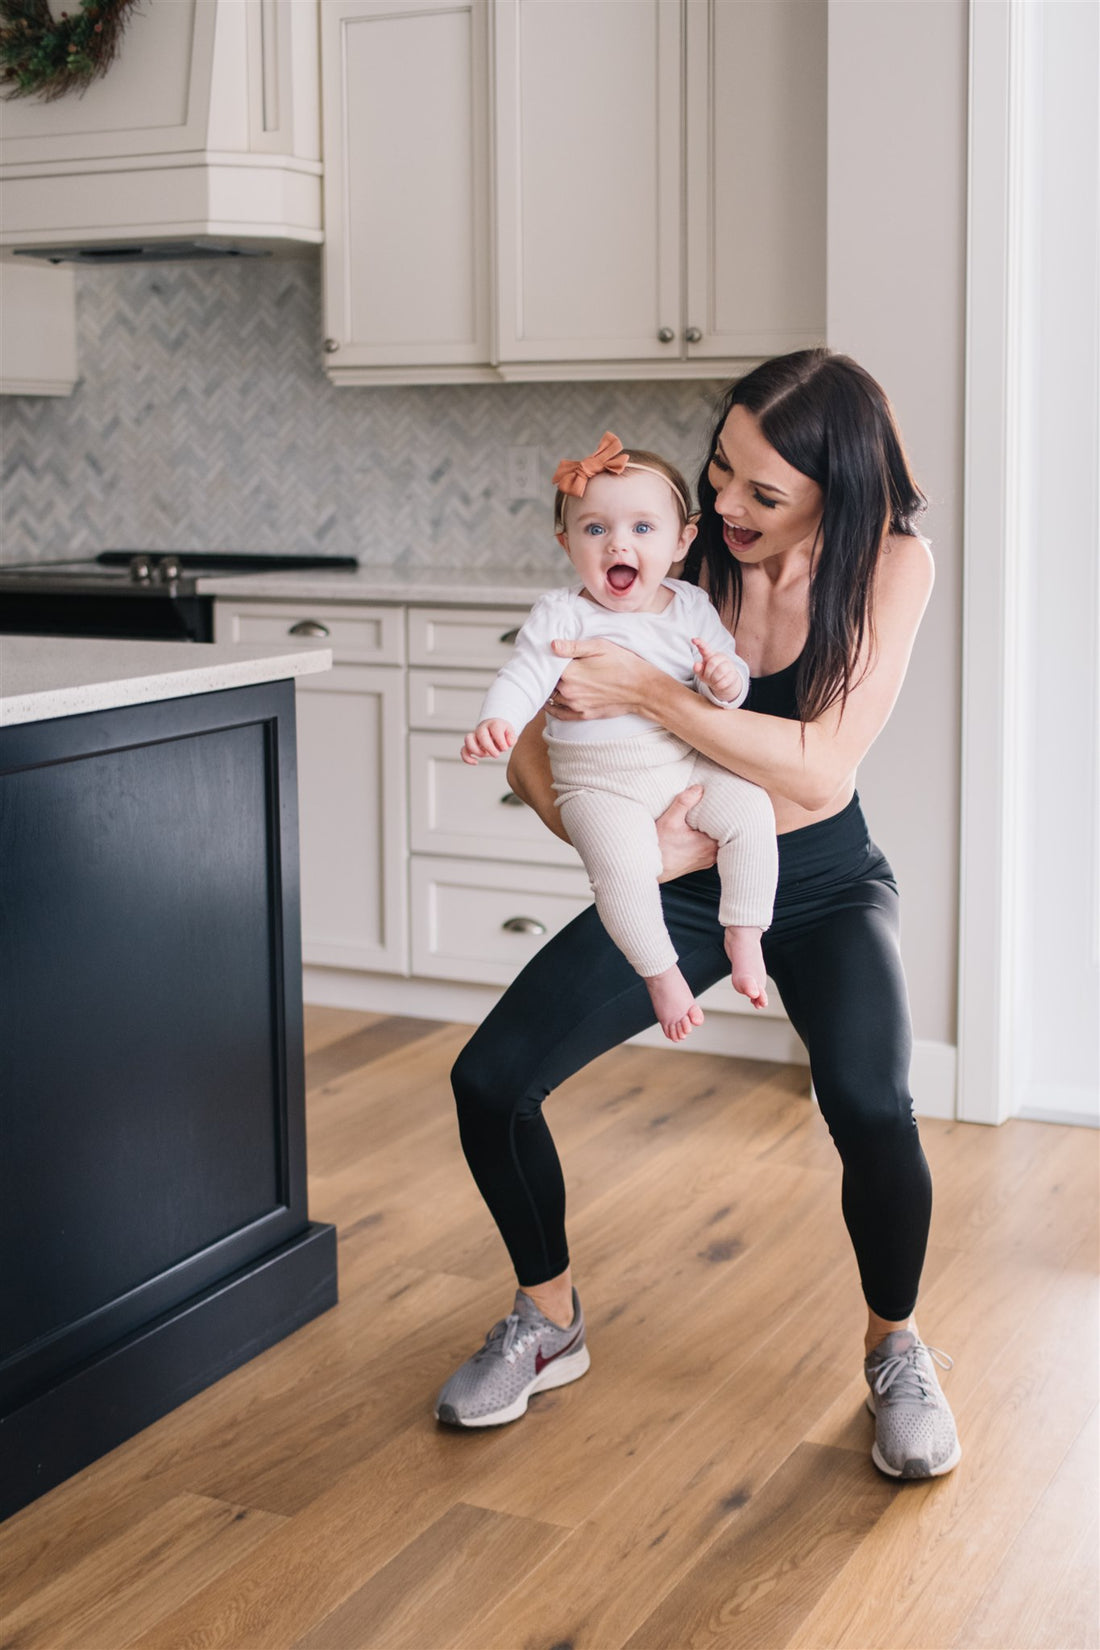 Maternity Charcoal Snatched Rib Active Leggings